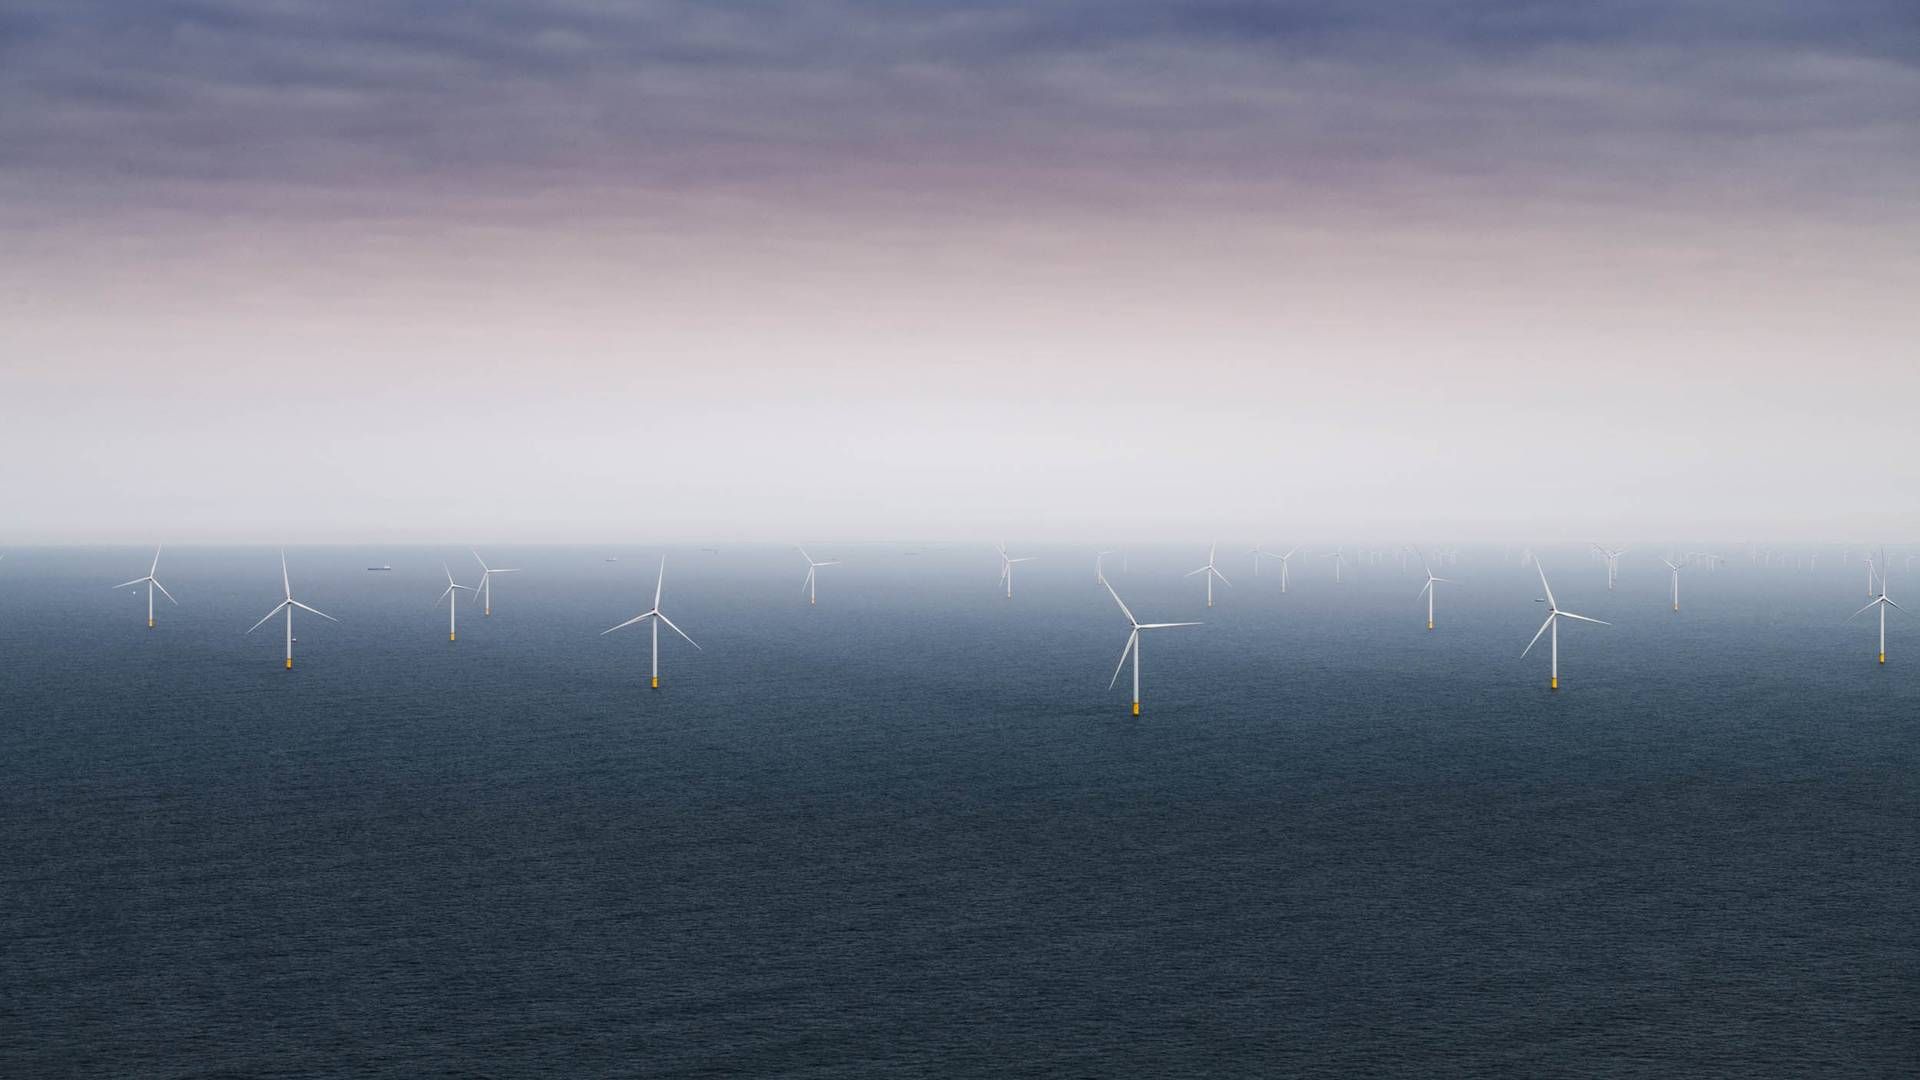 Finland has yet to have its first offshore wind farm - here are the turbines from Hollandse Kust Zuid off the Dutch coast between the towns of Scheveningen and Zandvoort. | Photo: Siemens Gamesa